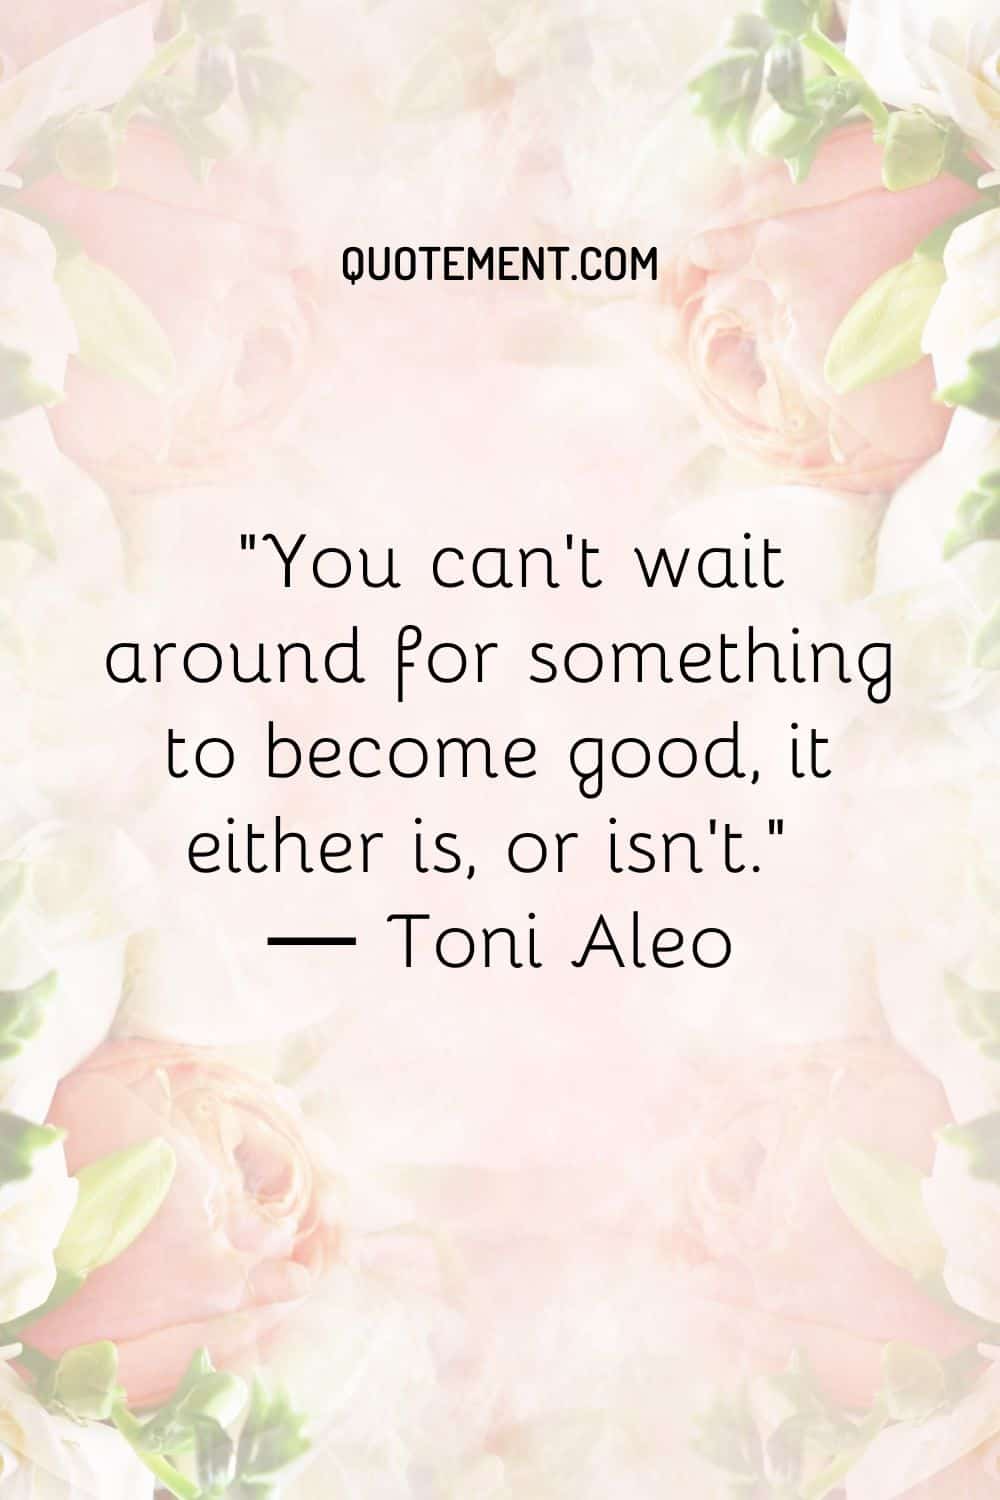 You can’t wait around for something to become good, it either is, or isn’t